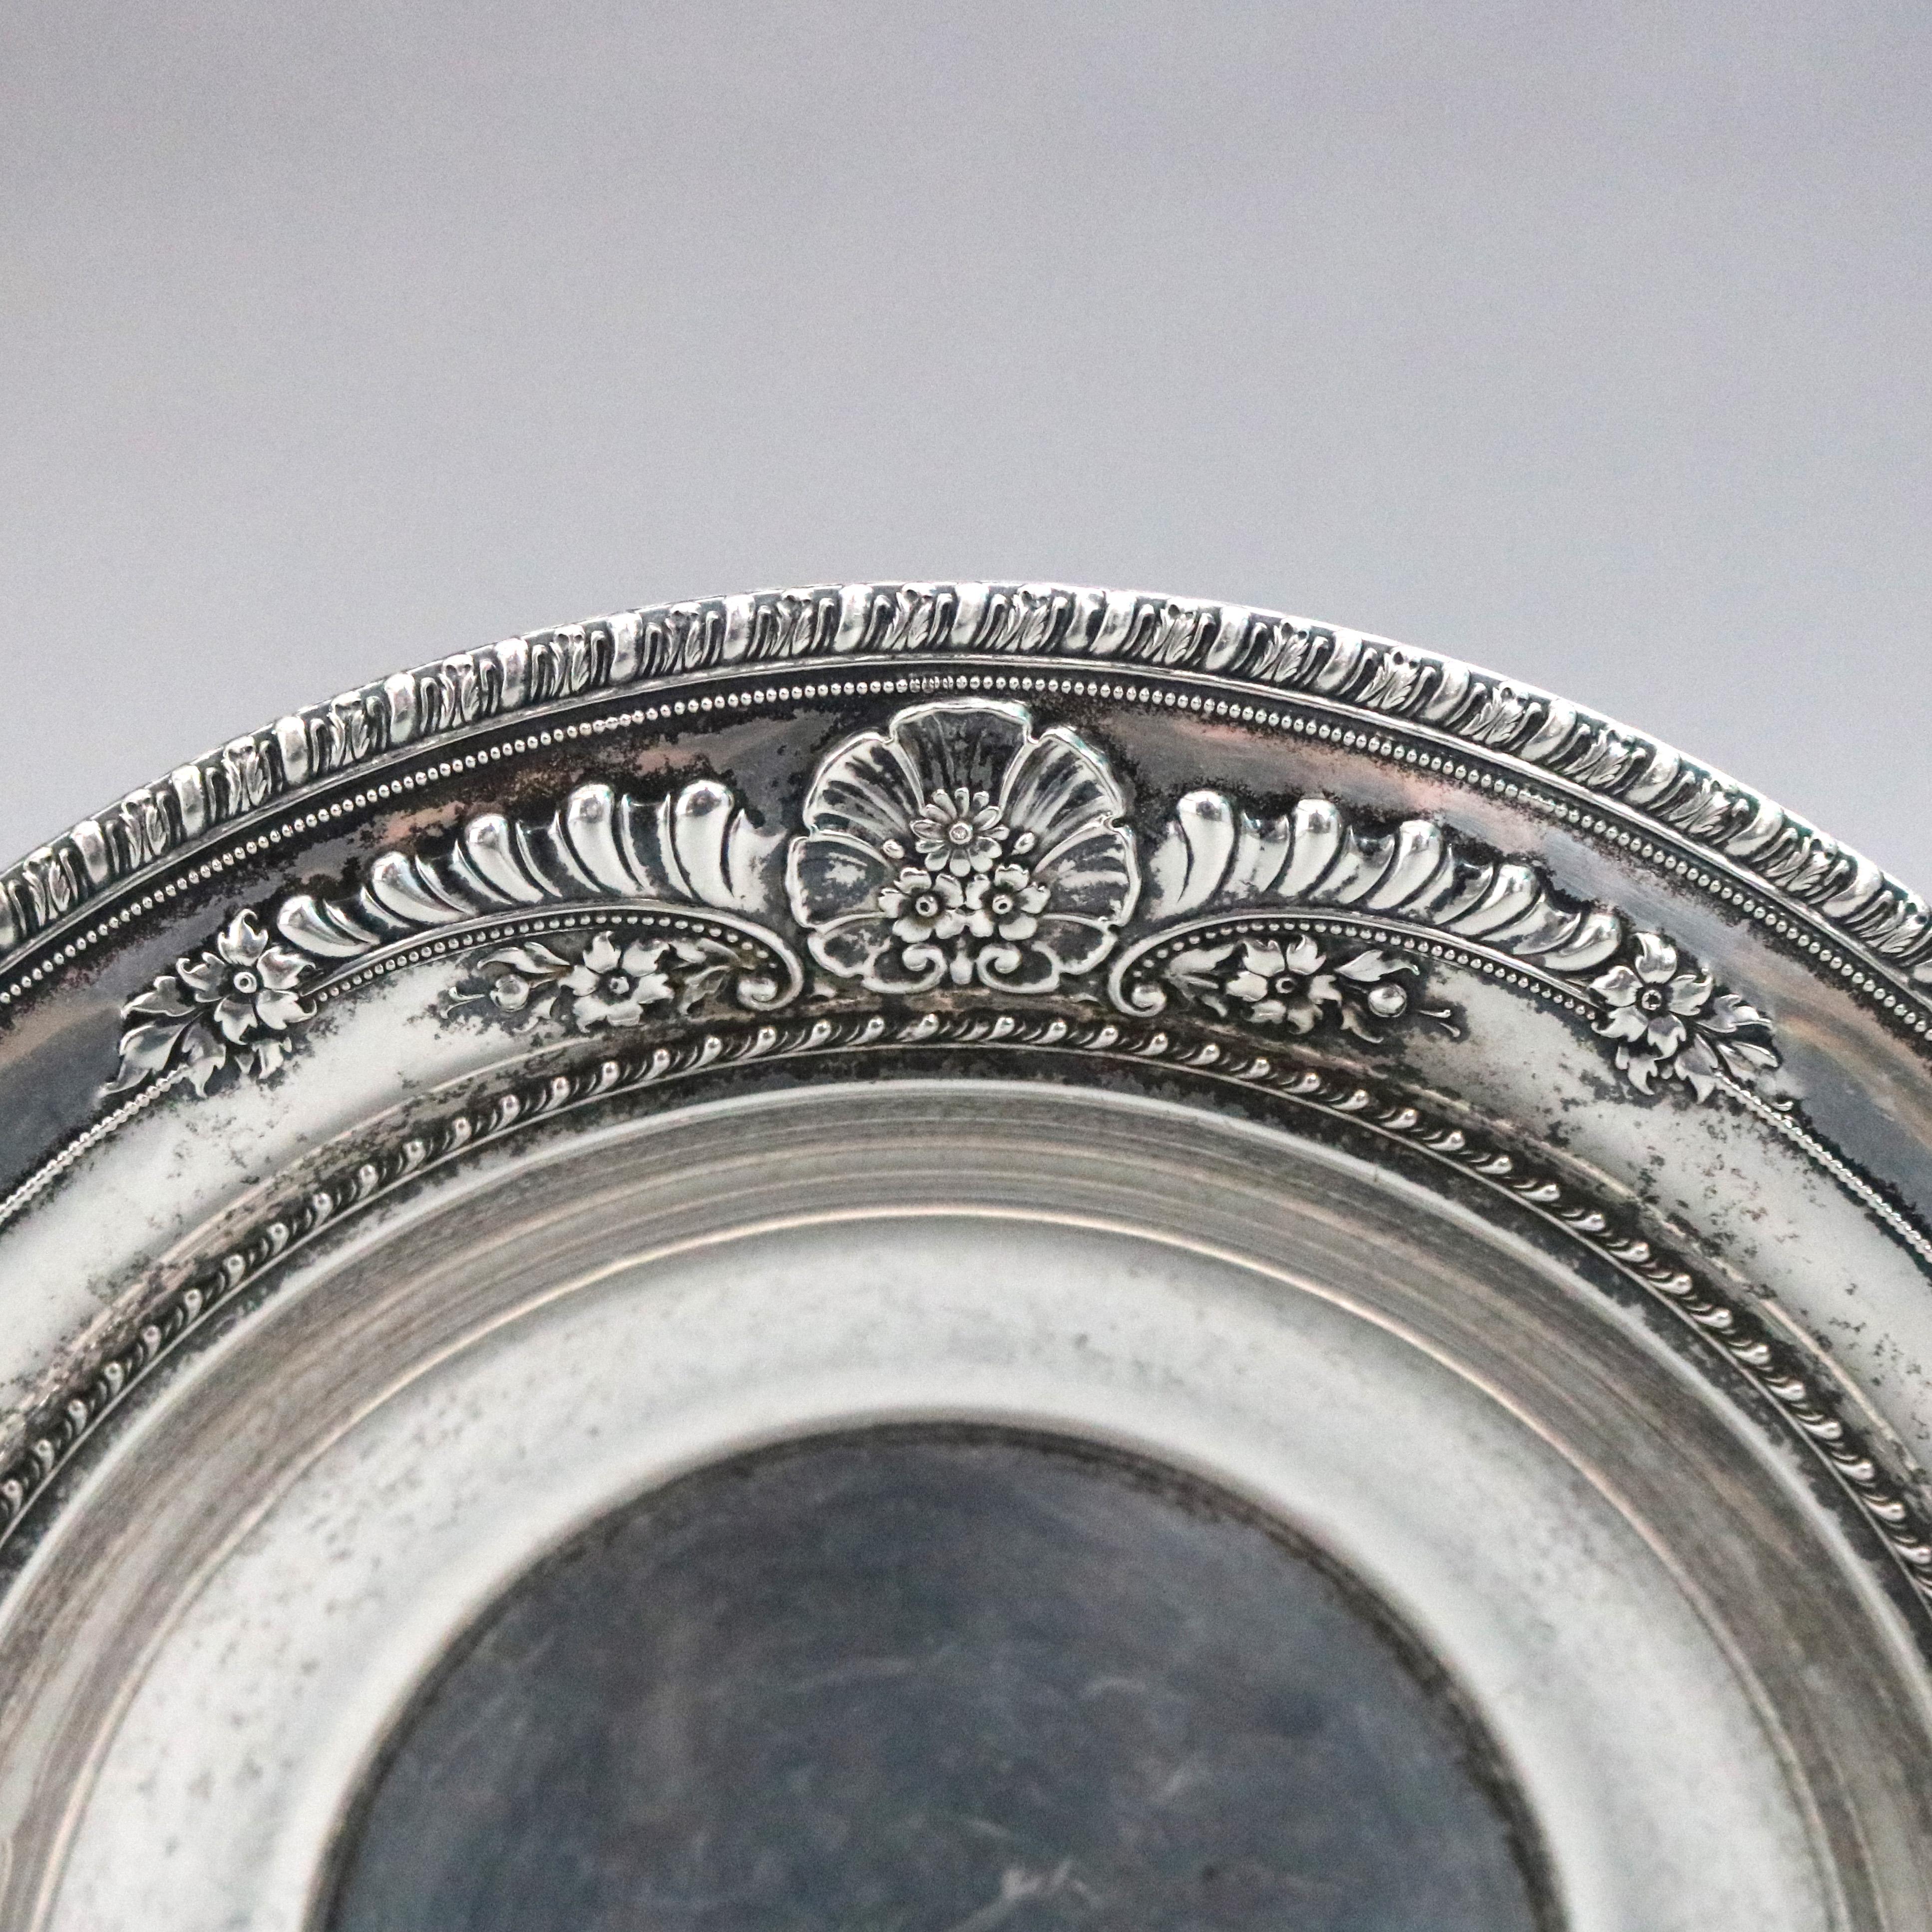 A vintage serving bowl by Wallace offers sterling silver construction with Repousse floral elements marked on base as photographed, circa 1930

Measures: 2